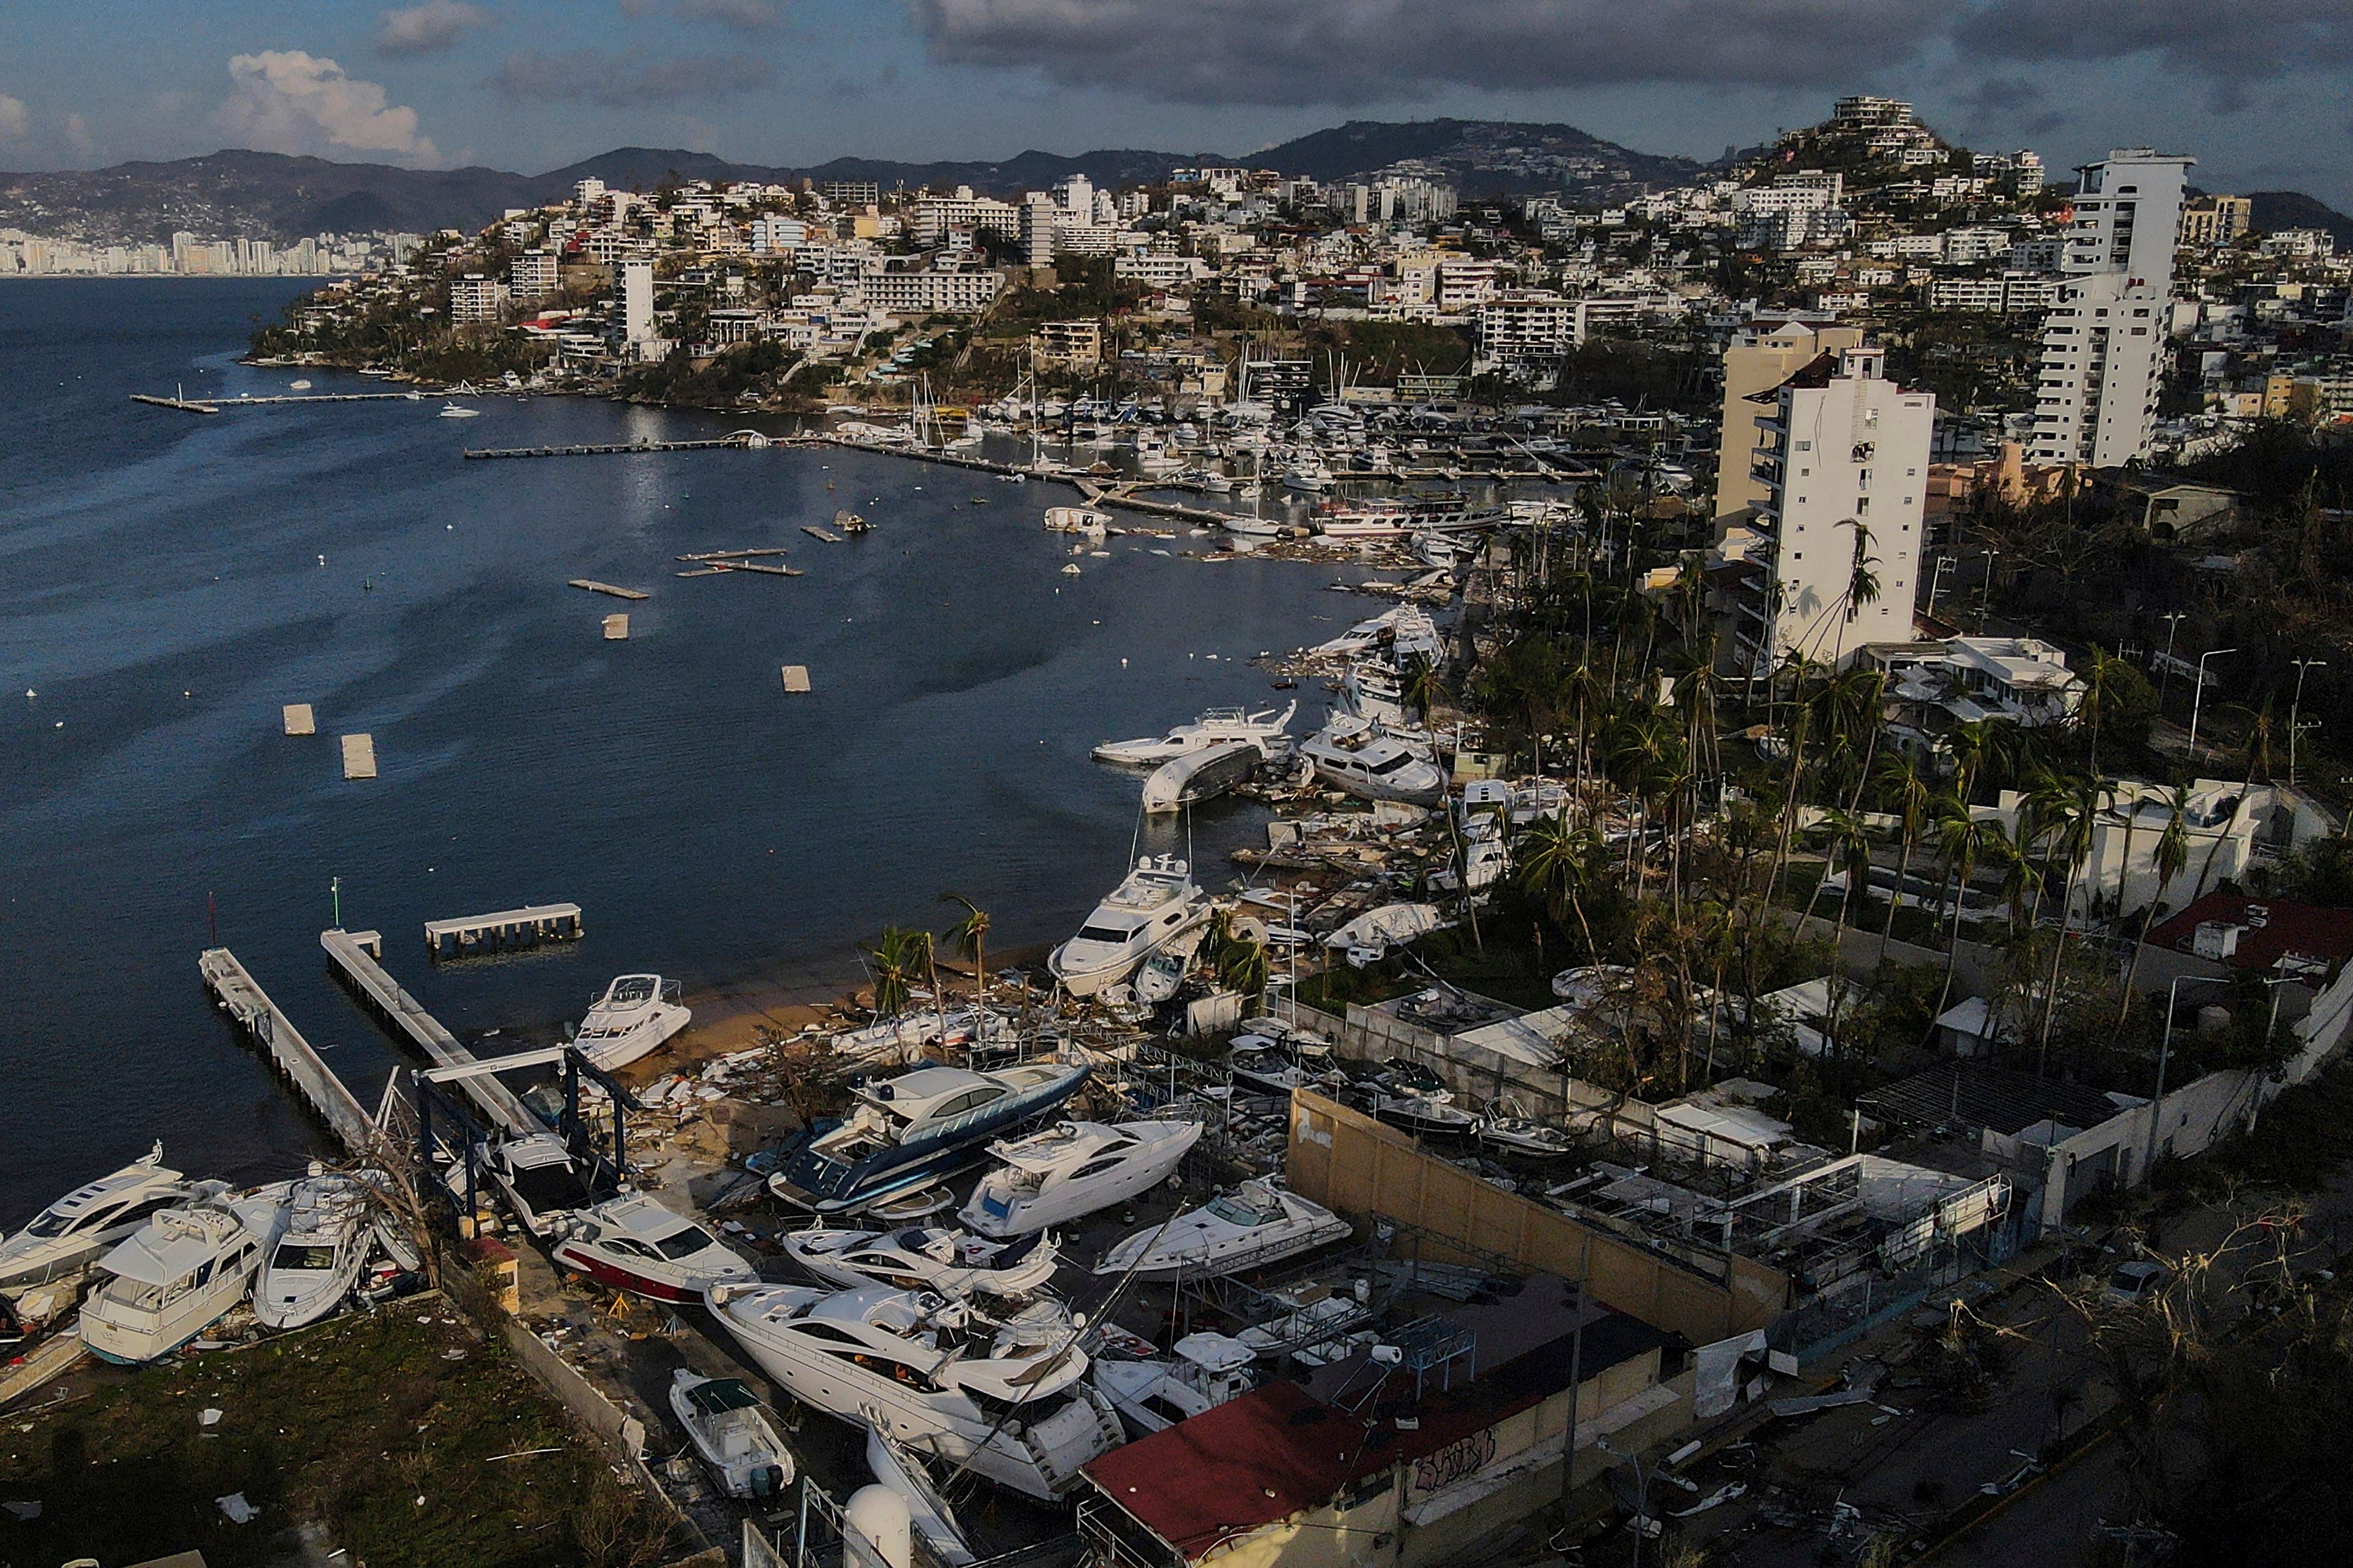 Acapulco’s beach area suffered massive damage from Category 5 Hurricane Otis